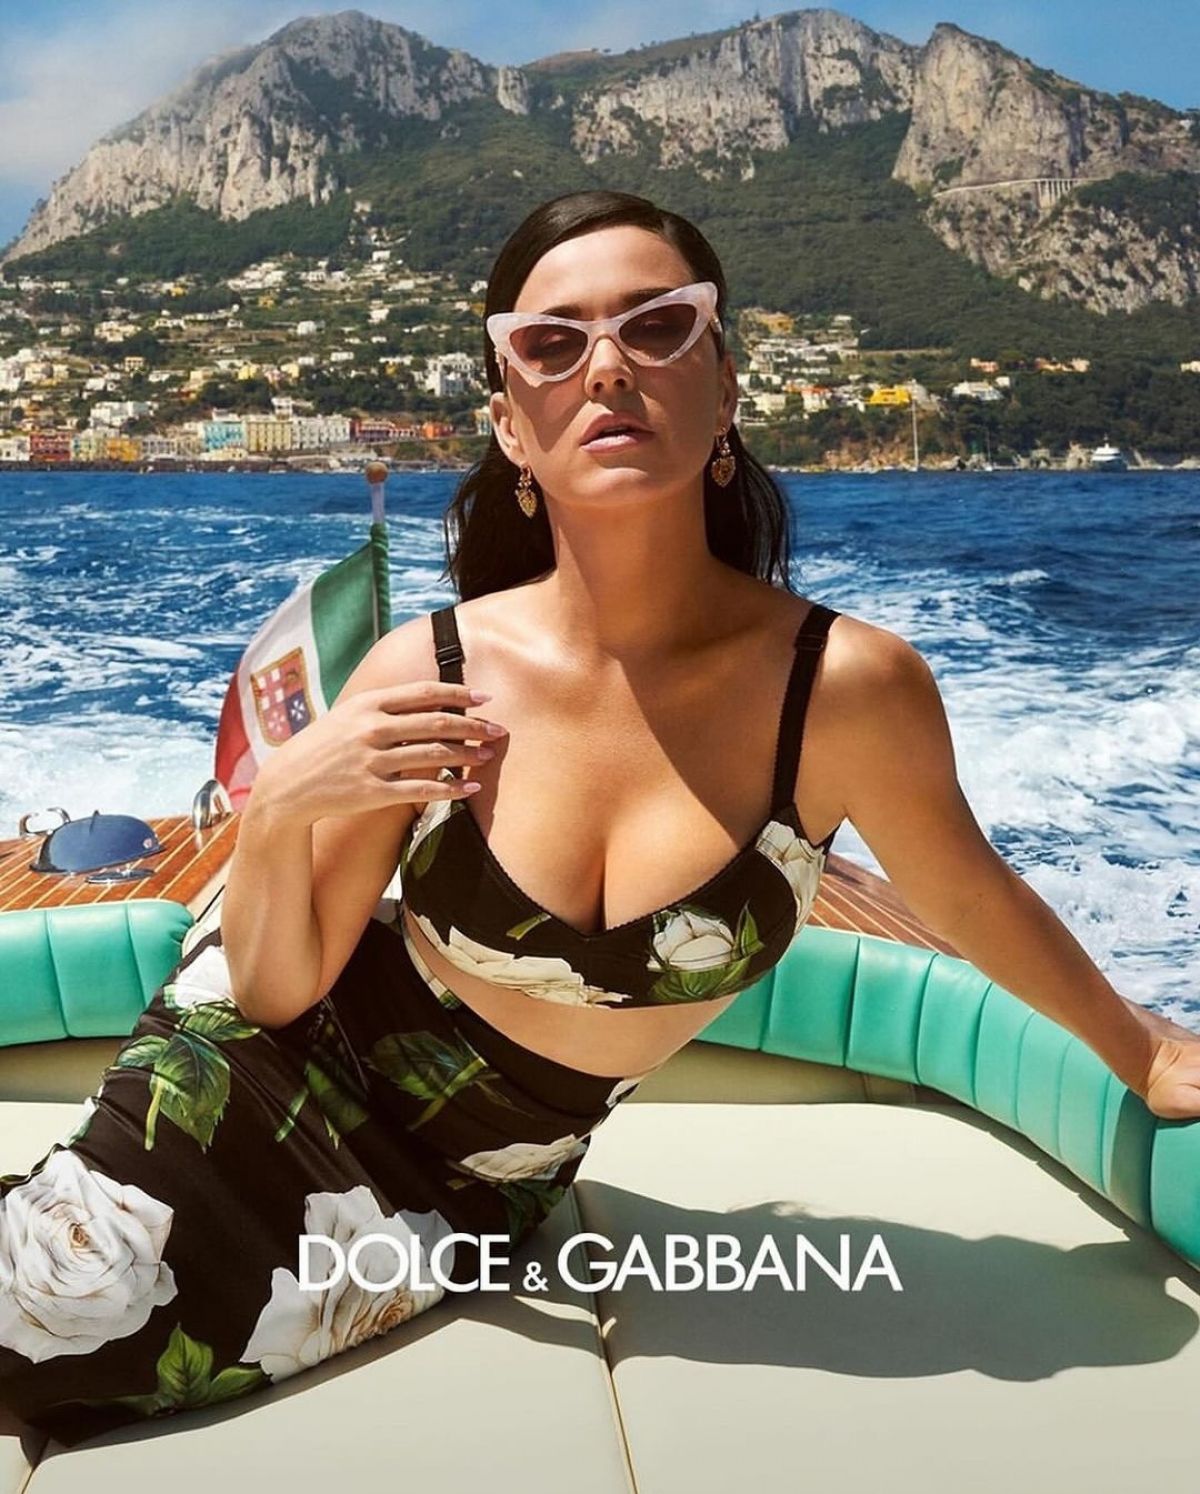 Katy Perry in Dolce & Gabbana